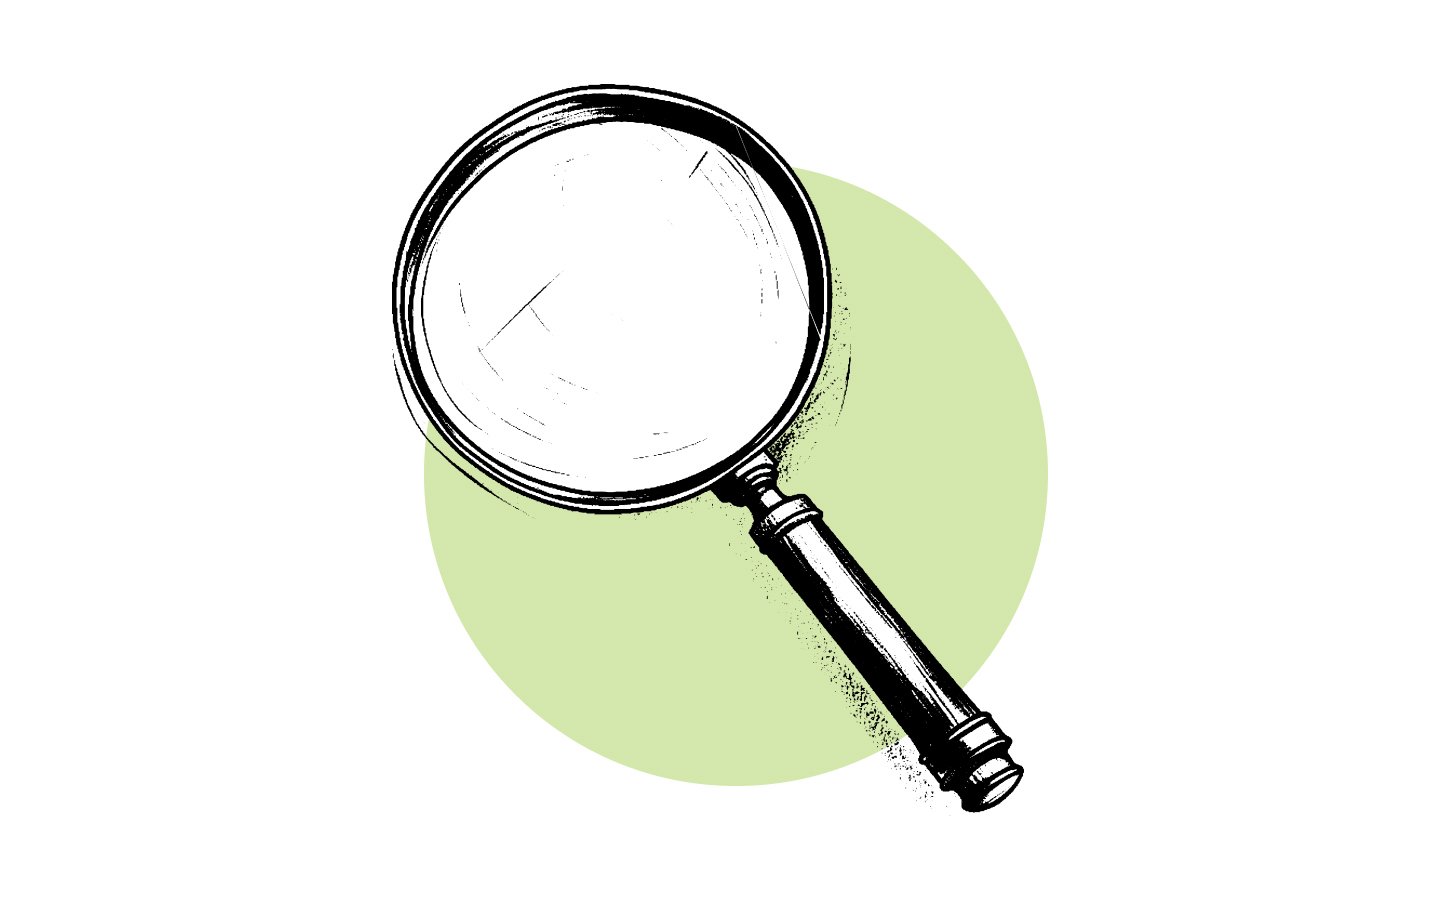 A magnifying glass